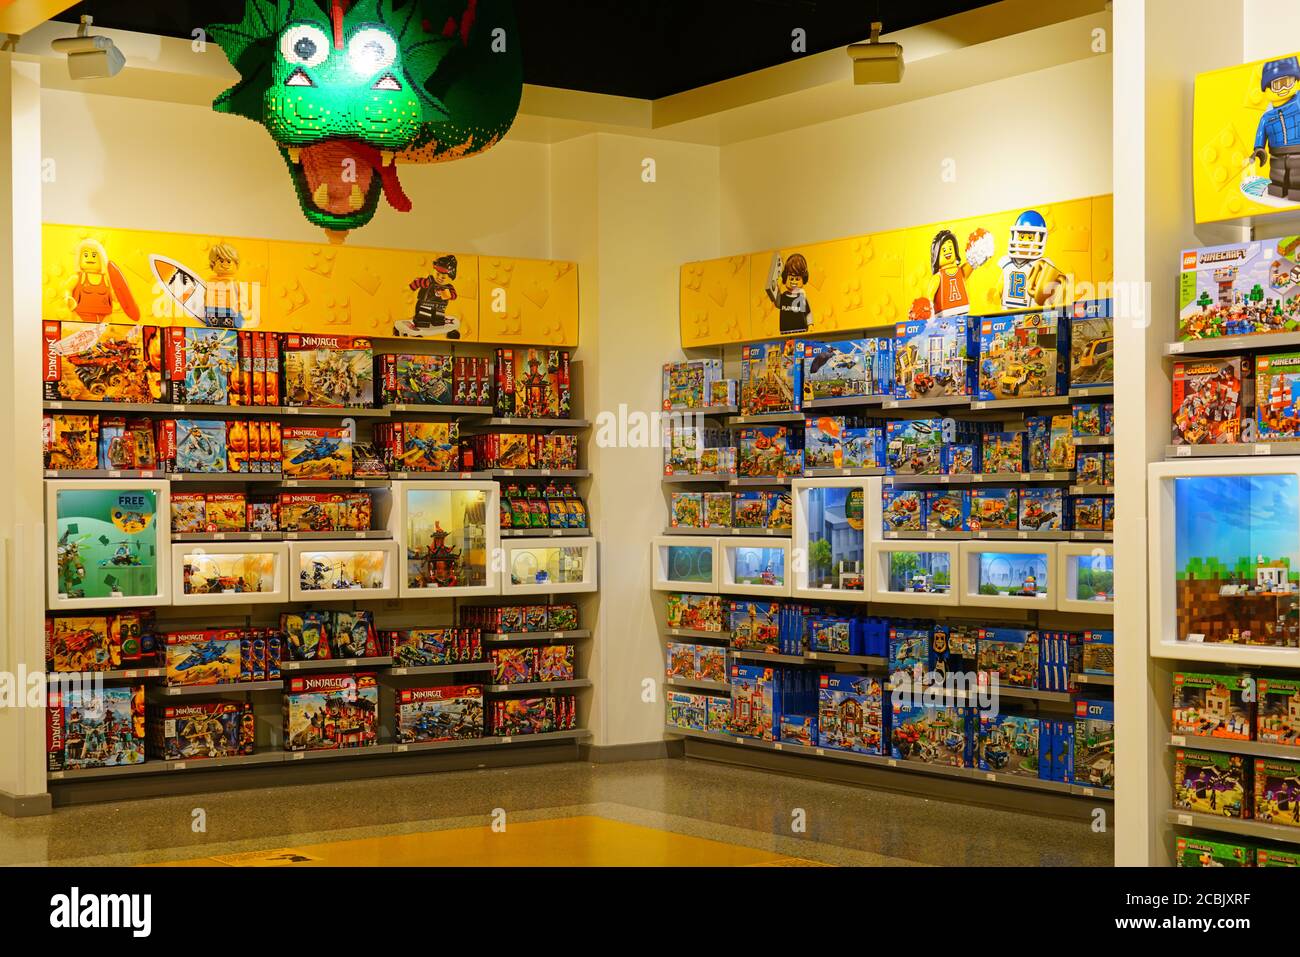 CHICAGO, IL -29 JUL 2020- The Lego Store inside the Water Tower Place  shopping mall located on Michigan Avenue in downtown Chicago includes giant  scul Stock Photo - Alamy